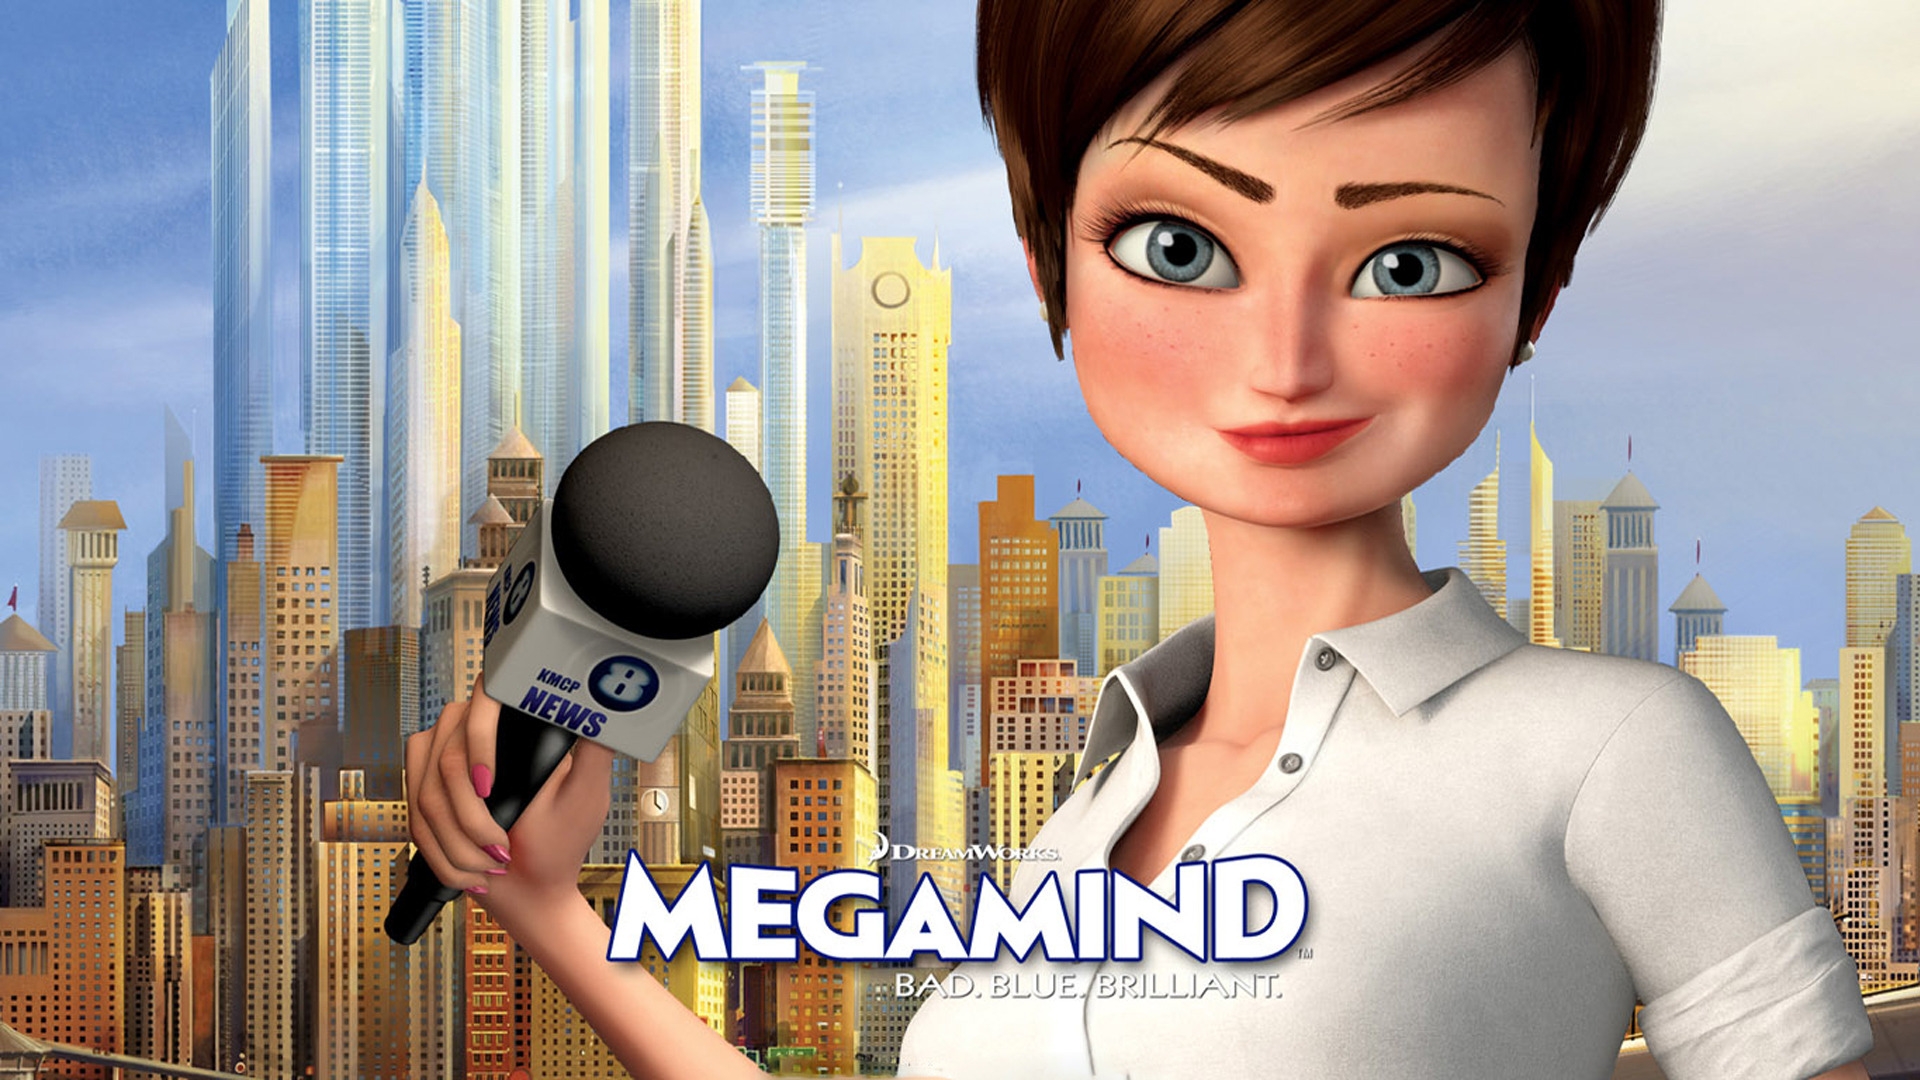 Megamind Roxanne Ritchie for 1920 x 1080 HDTV 1080p resolution